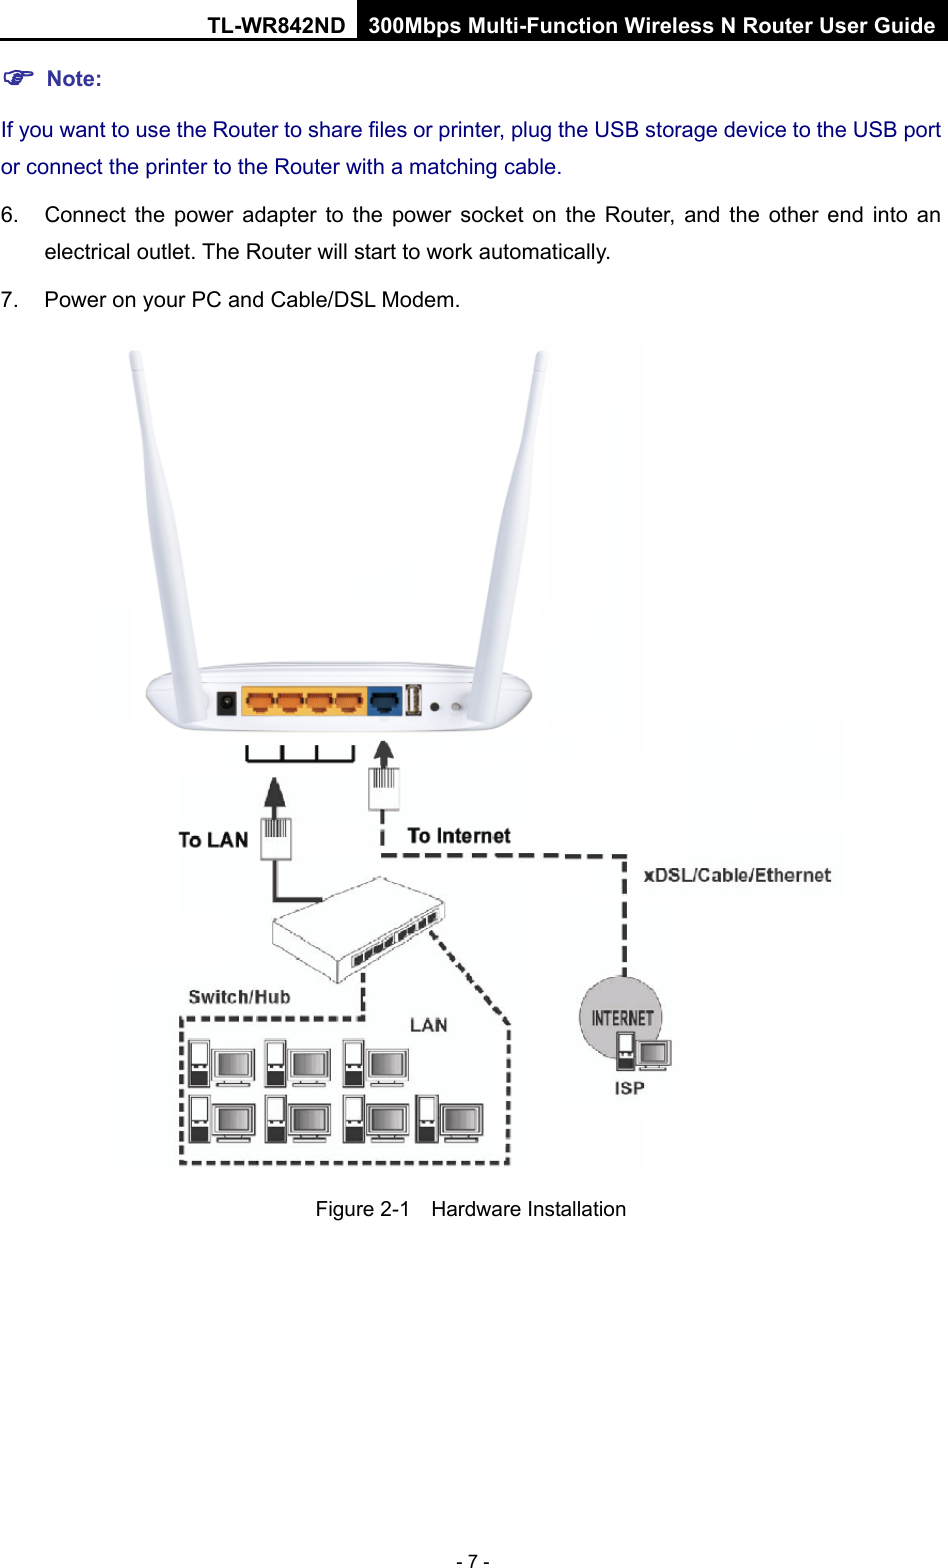 TL-WR842ND 300Mbps Multi-Function Wireless N Router User Guide  - 7 -  Note: If you want to use the Router to share files or printer, plug the USB storage device to the USB port or connect the printer to the Router with a matching cable. 6. Connect the power adapter to the power socket on the Router, and the other end into an electrical outlet. The Router will start to work automatically. 7. Power on your PC and Cable/DSL Modem.  Figure 2-1  Hardware Installation   